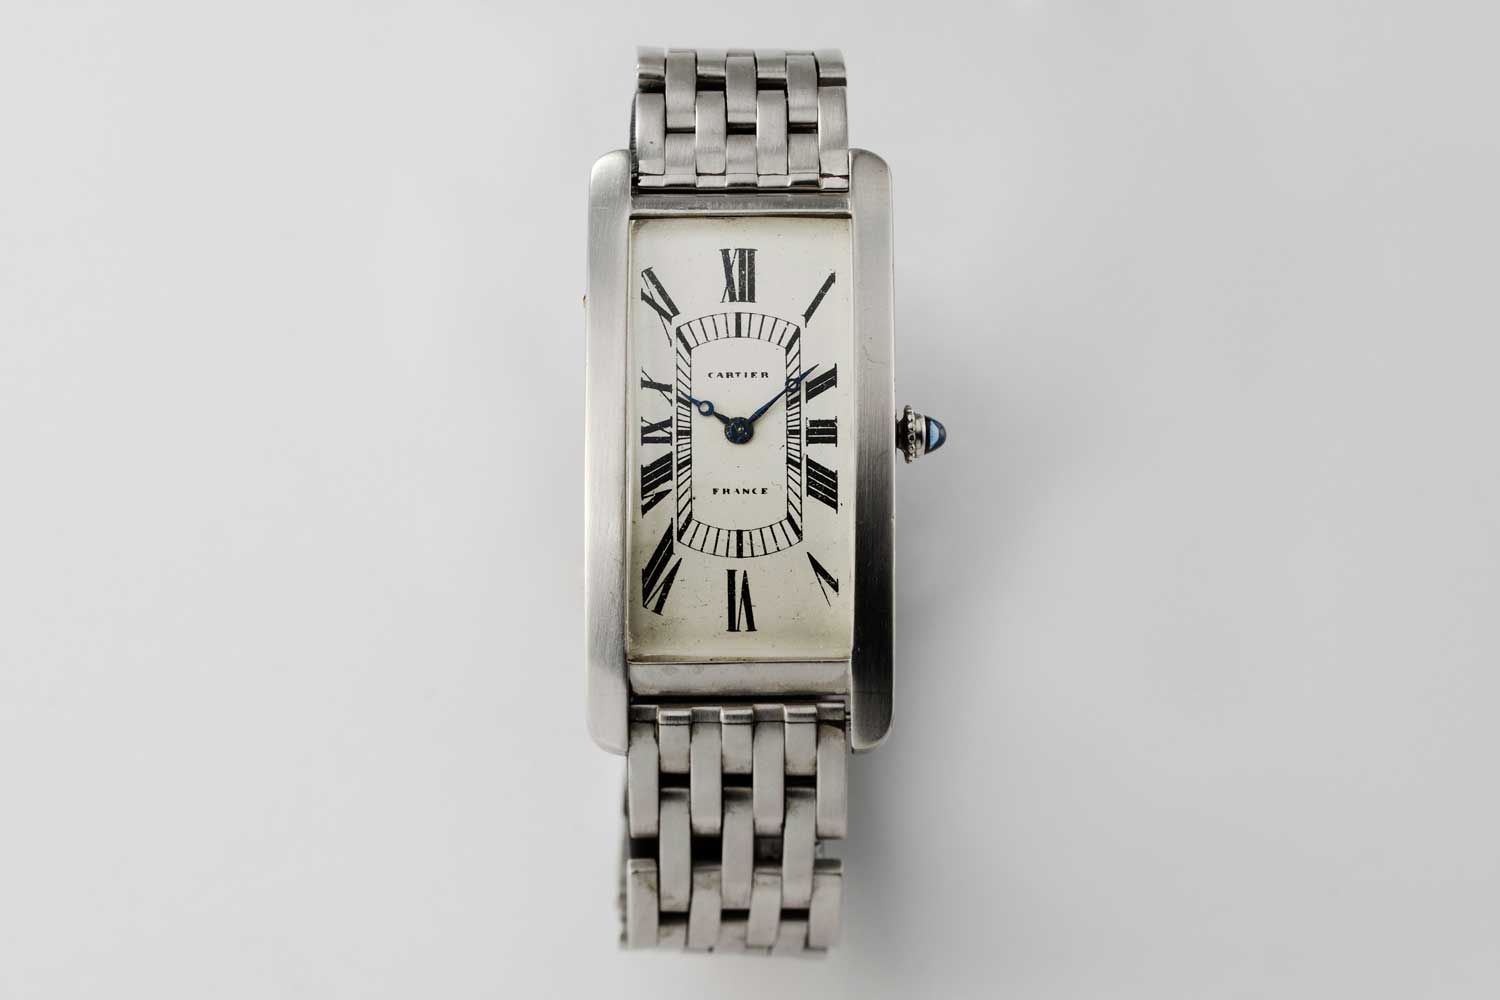 1928 Platinum Cartier Tank Cintrée with original 7-link platinum bracelet; this particular example is from the private collection of Auro Montanari (©Revolution)